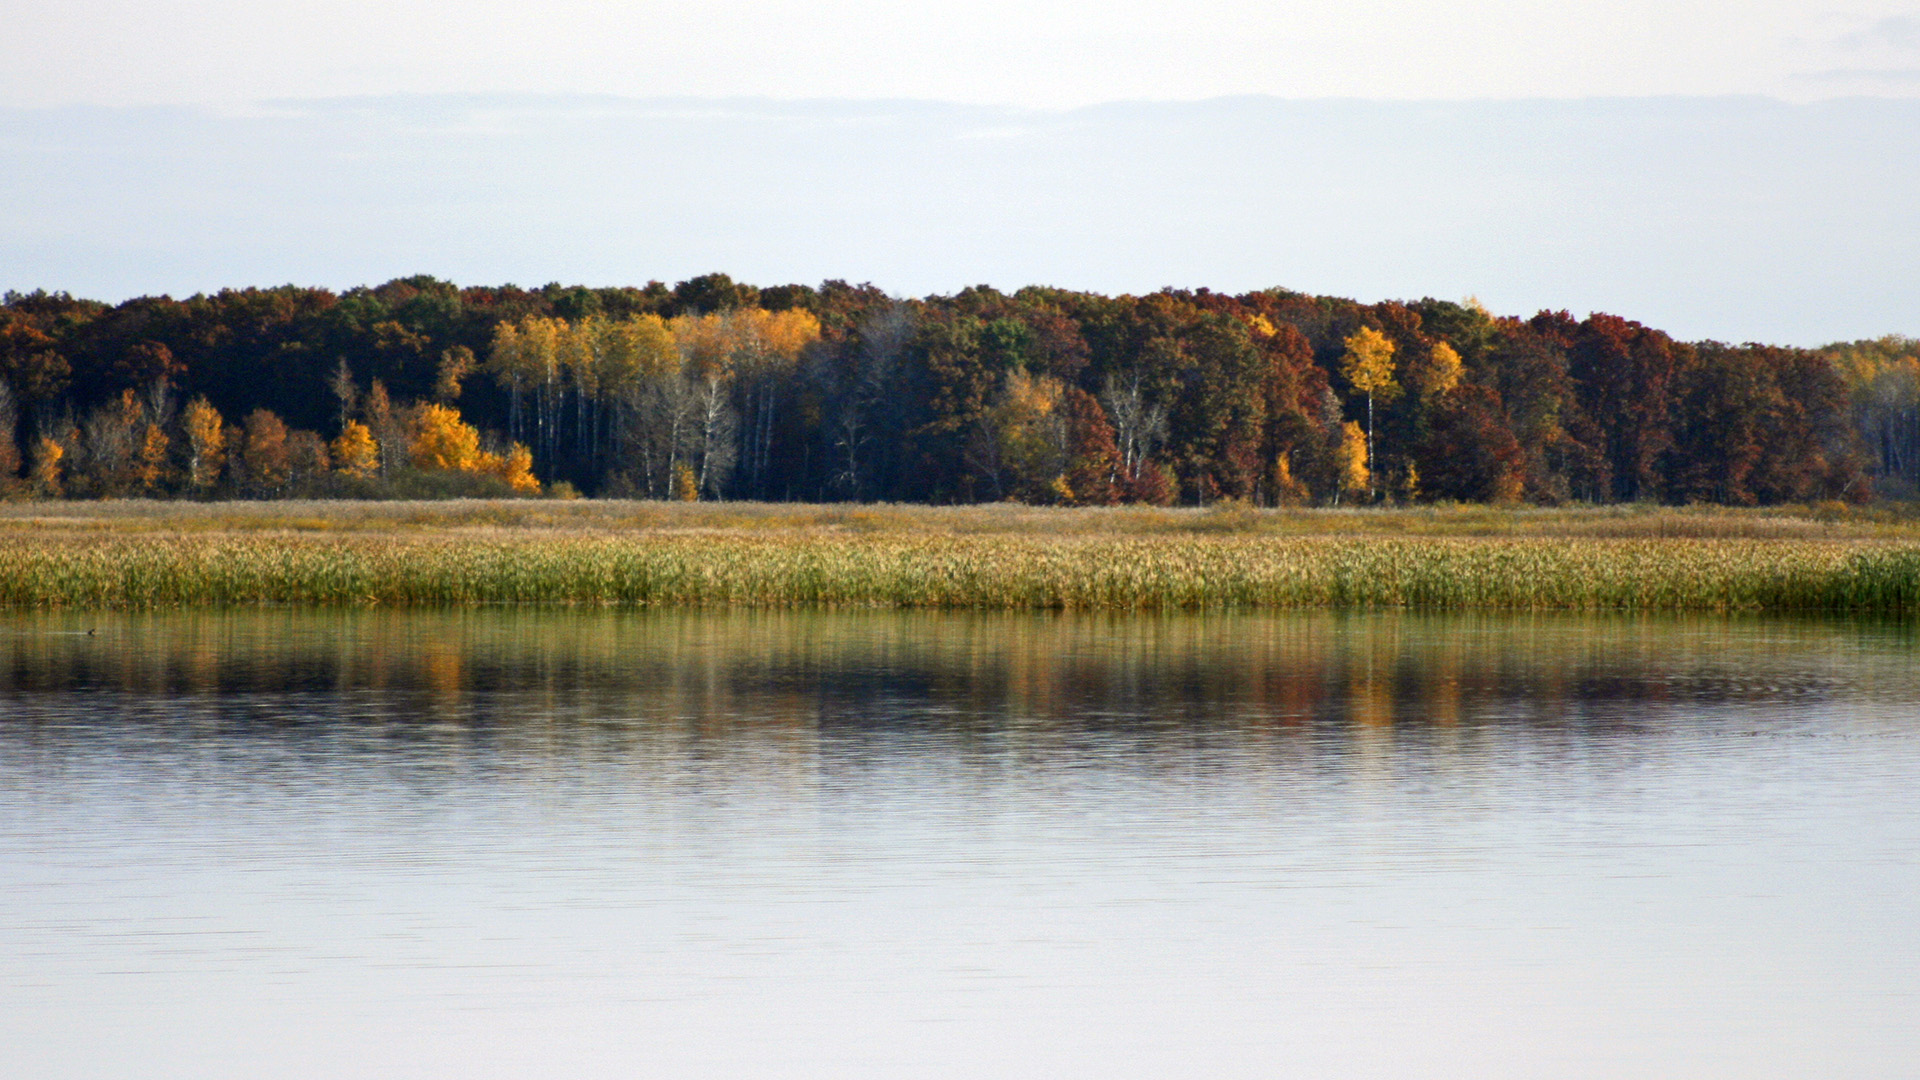 Calm waters on a lake reflect reeds and trees with leaves changing color that stand on its far shore.